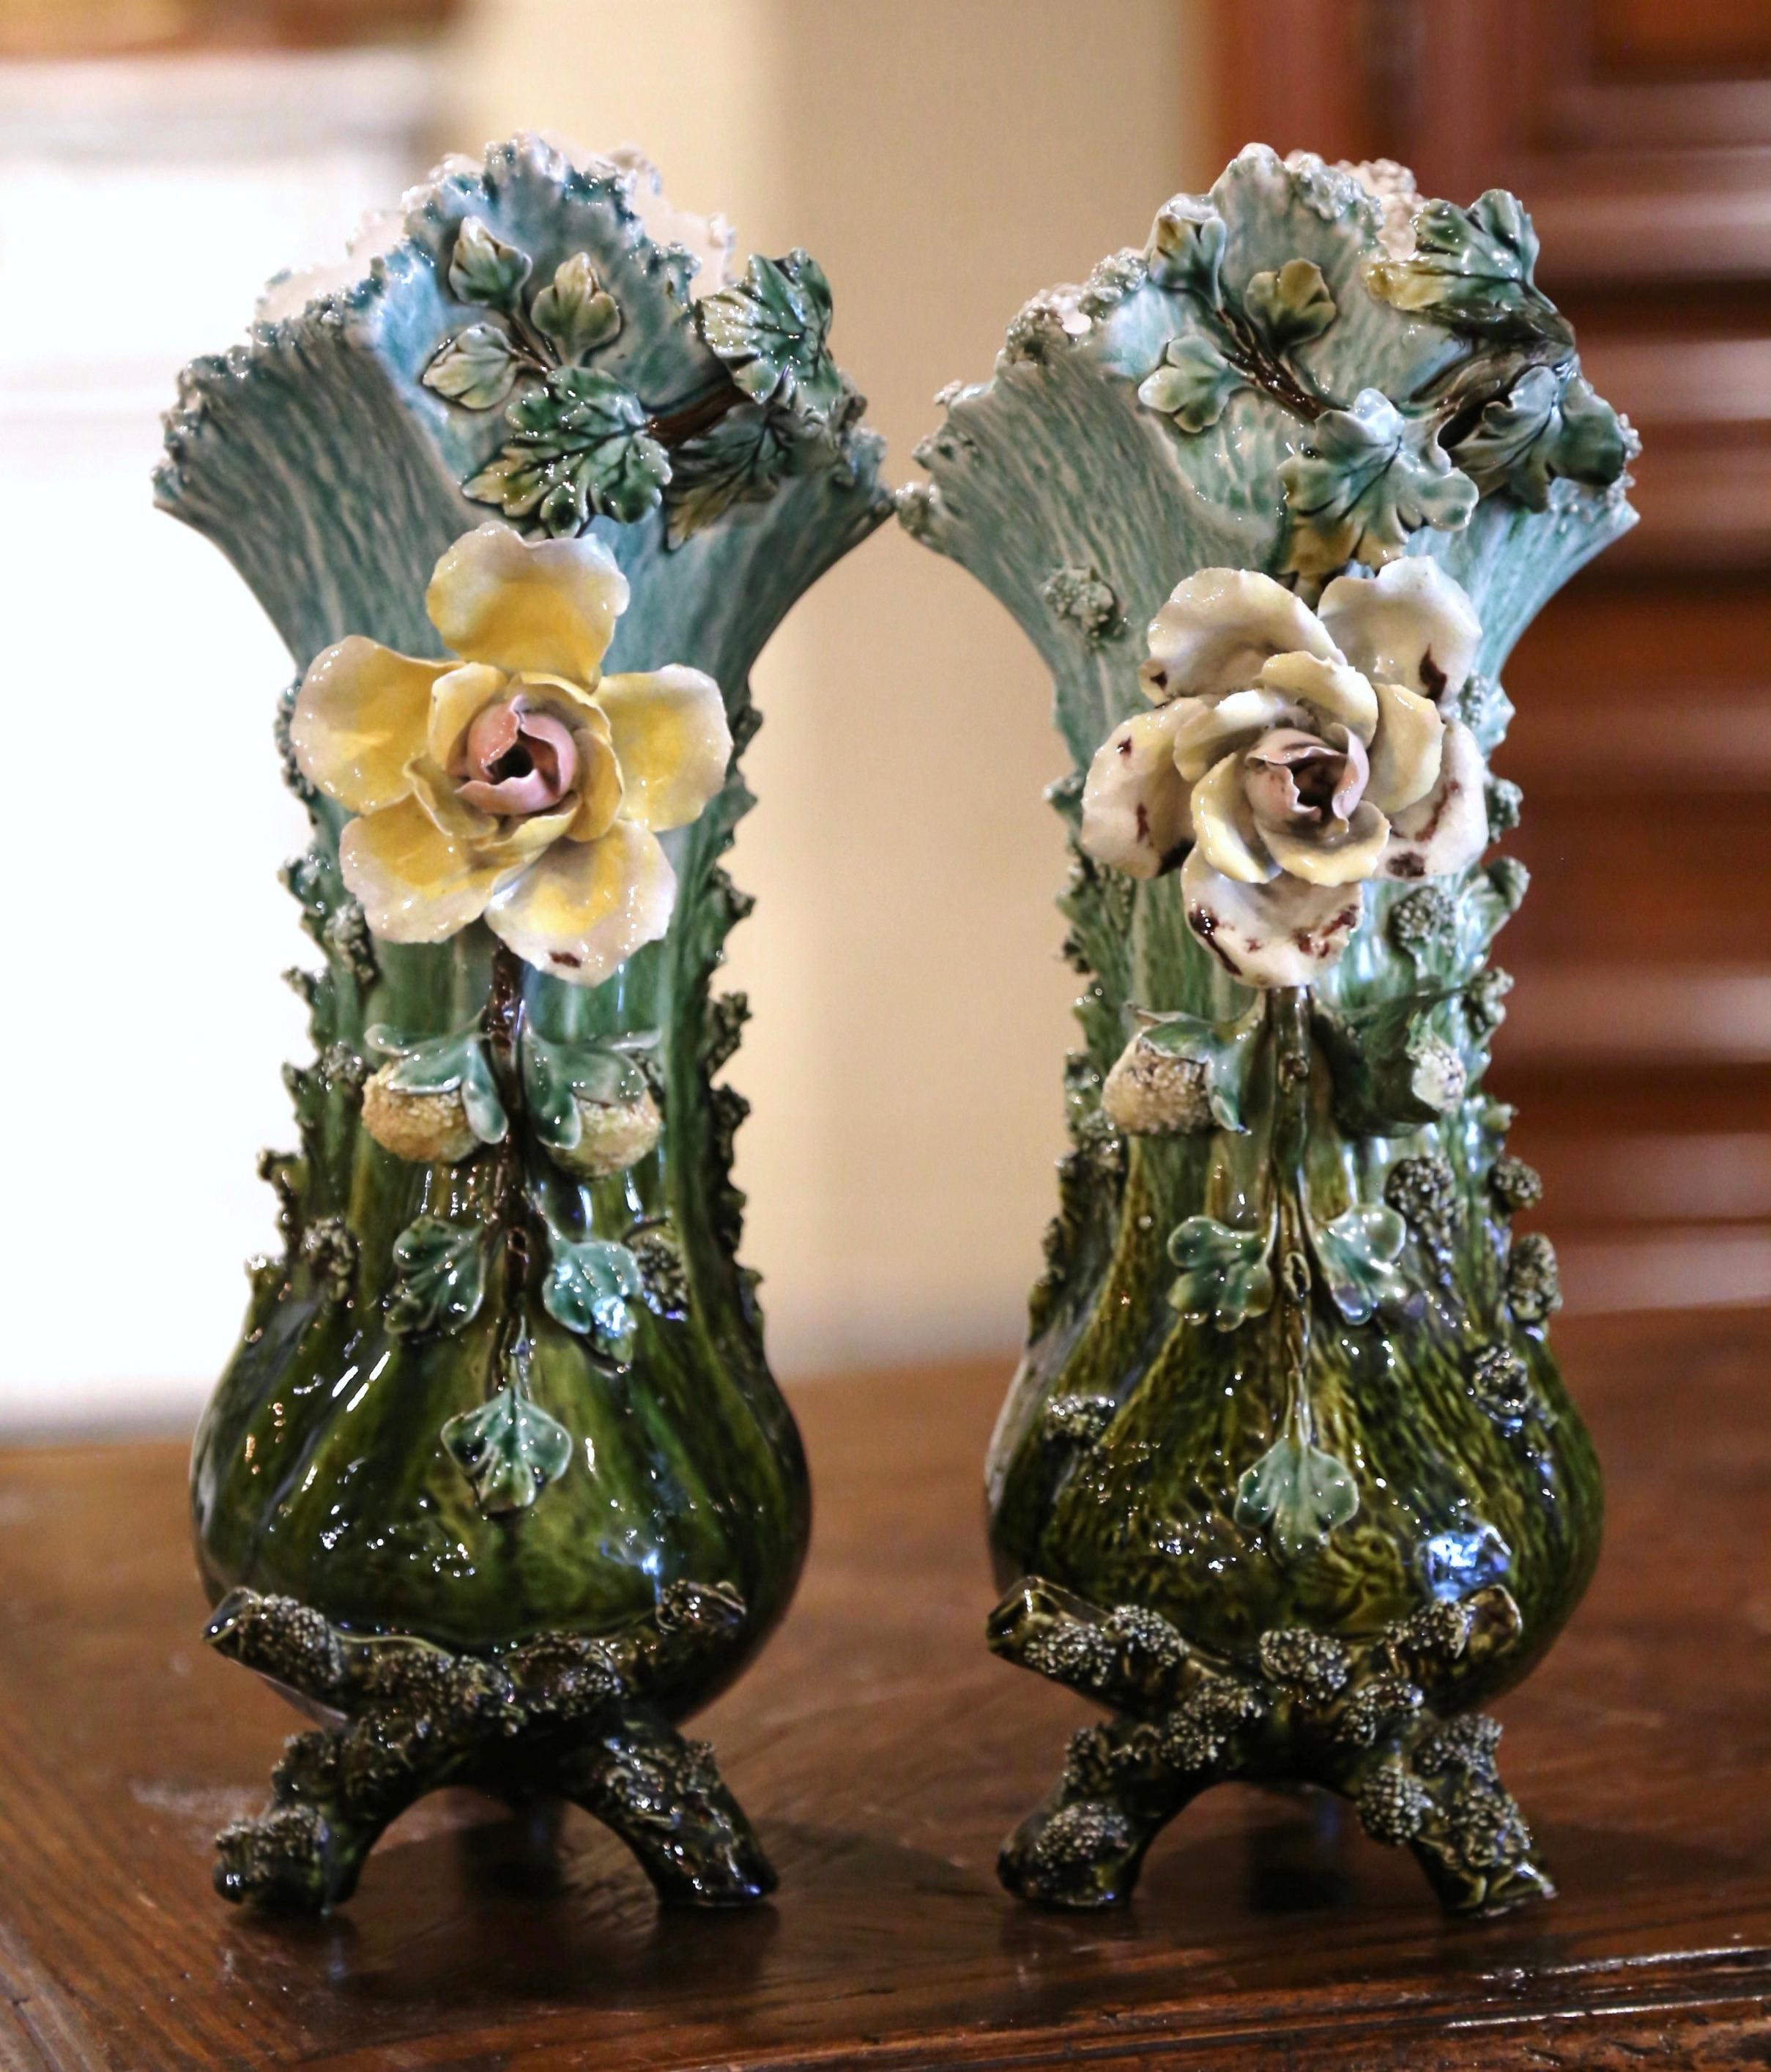 Faience Pair of 19th Century French Painted Ceramic Barbotine Vases with Floral Motifs